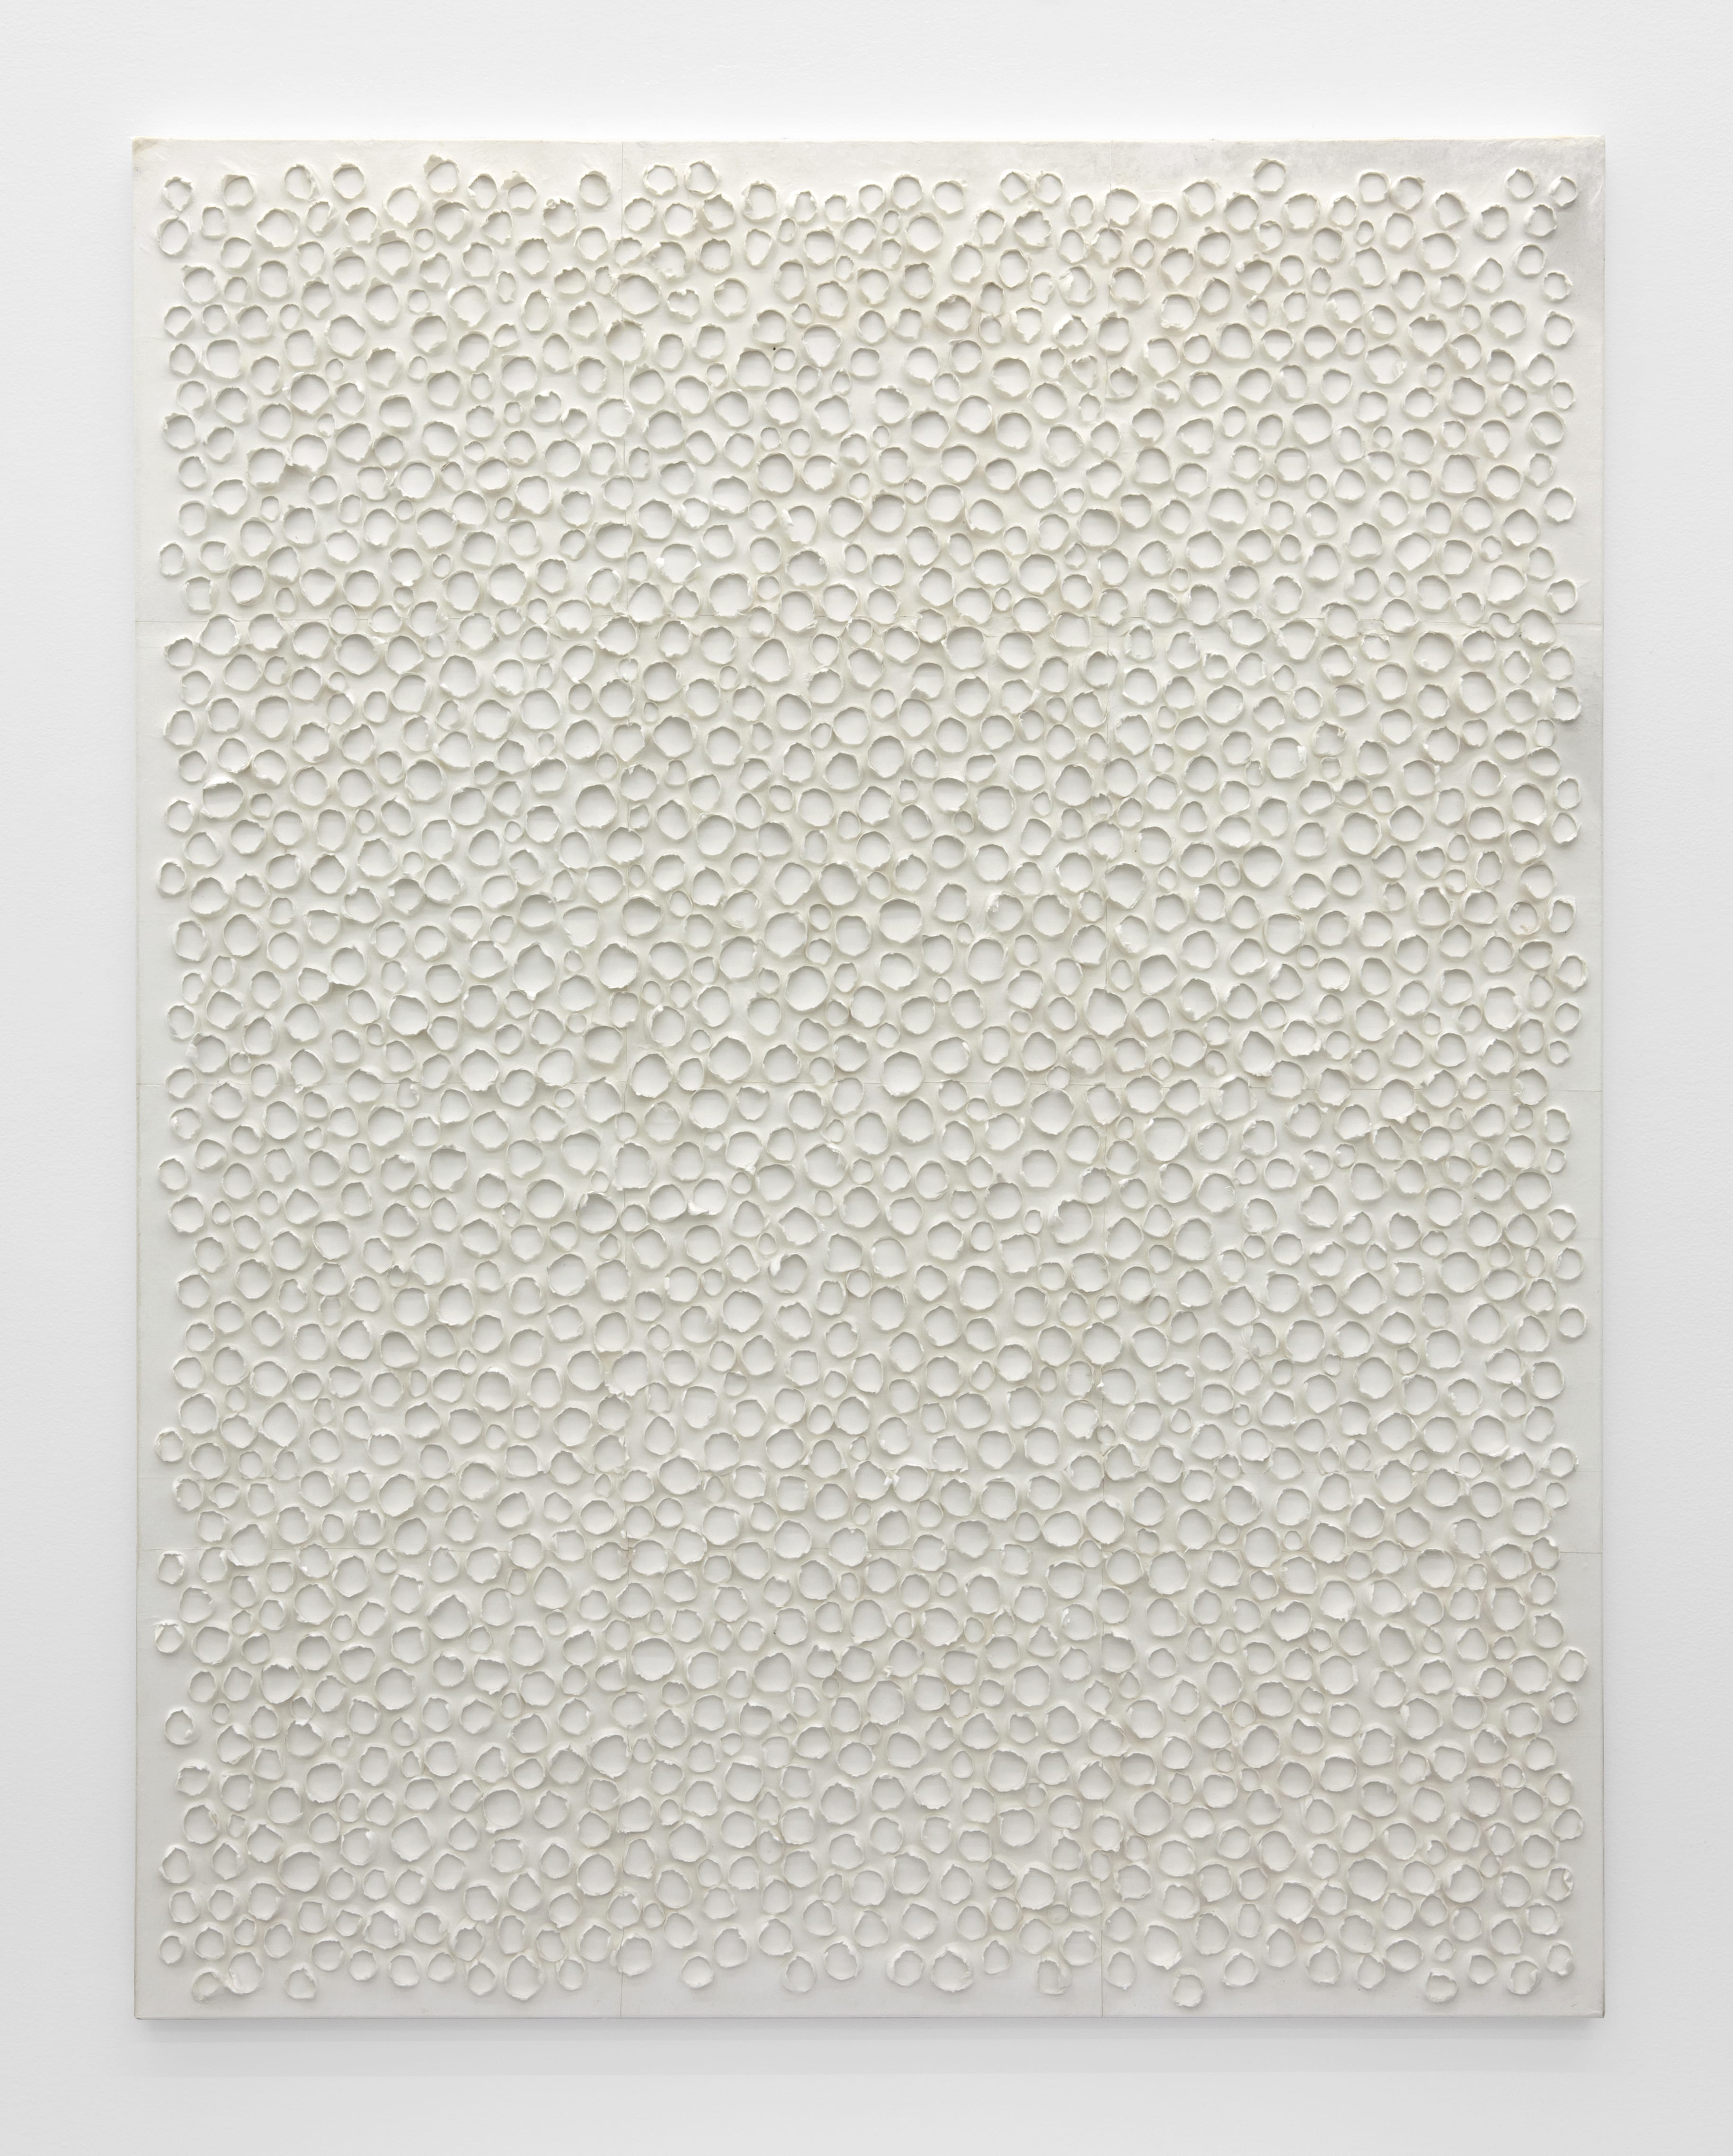 Kwon Young-woo "Untitled," courtesy the Estate of Kwon Young-woo and Blum & Poe, Los Angeles/New York/Tokyo